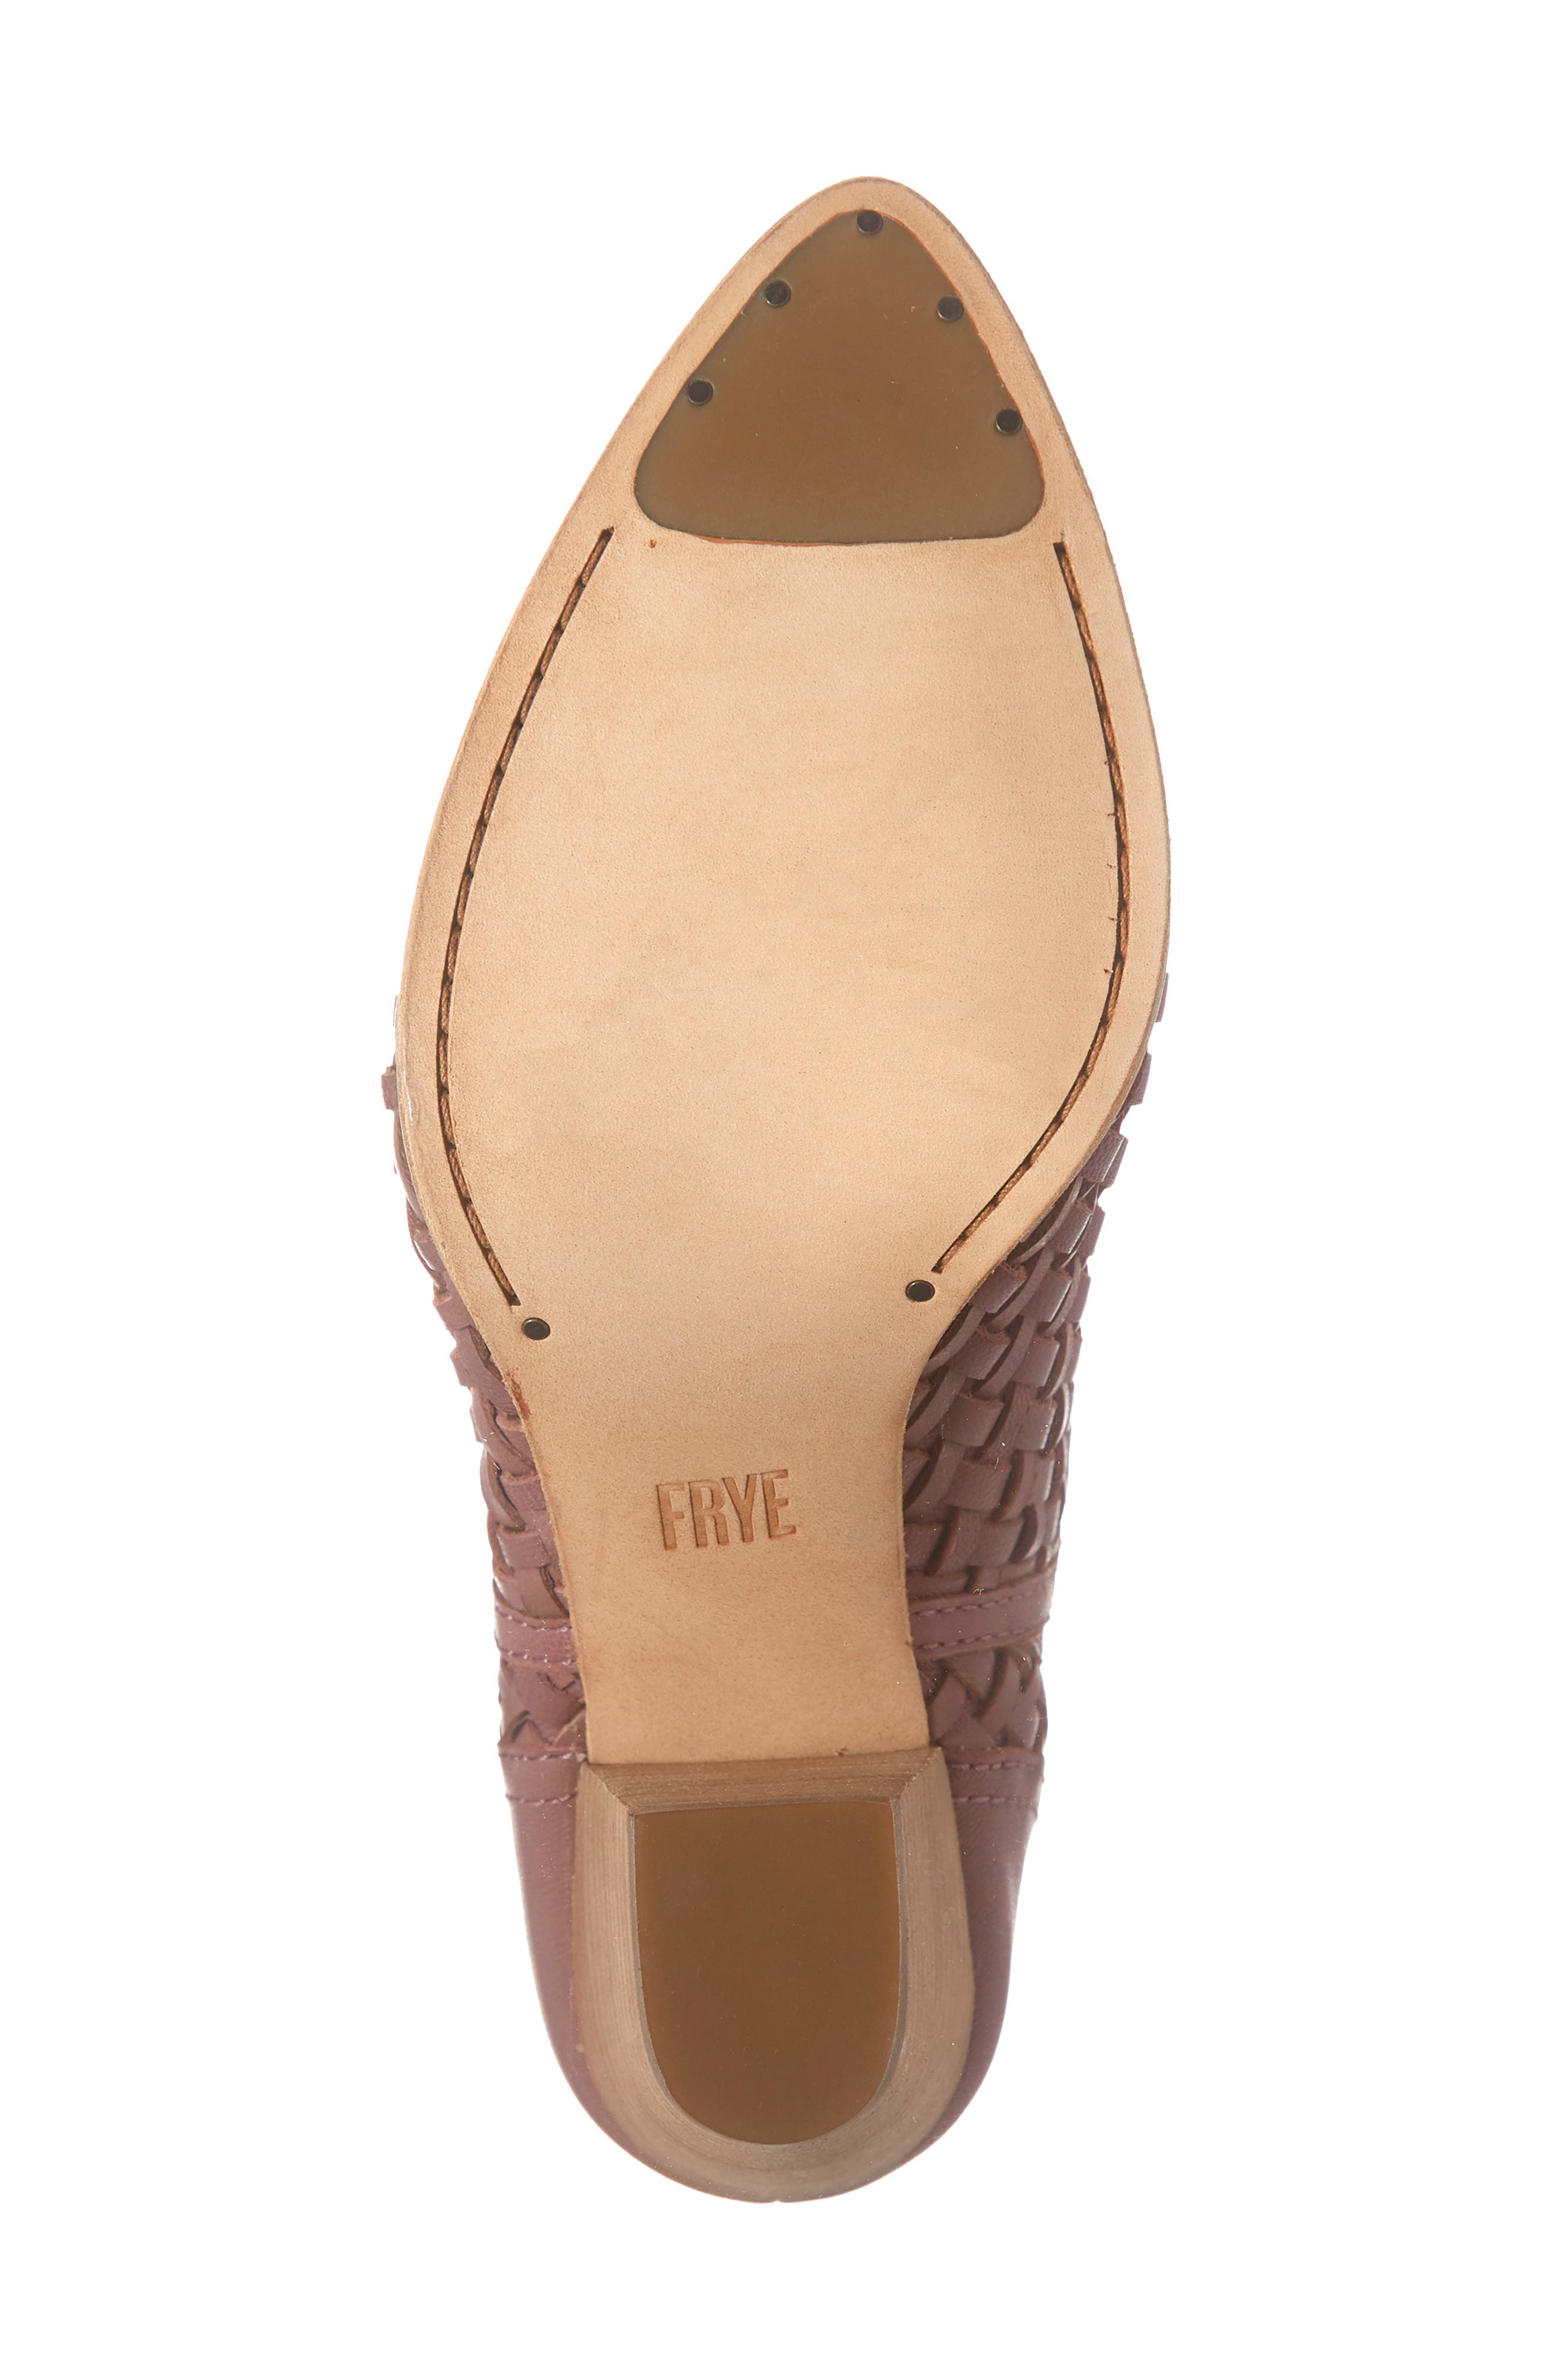 Frye | Reed Cut-Out Woven Bootie 